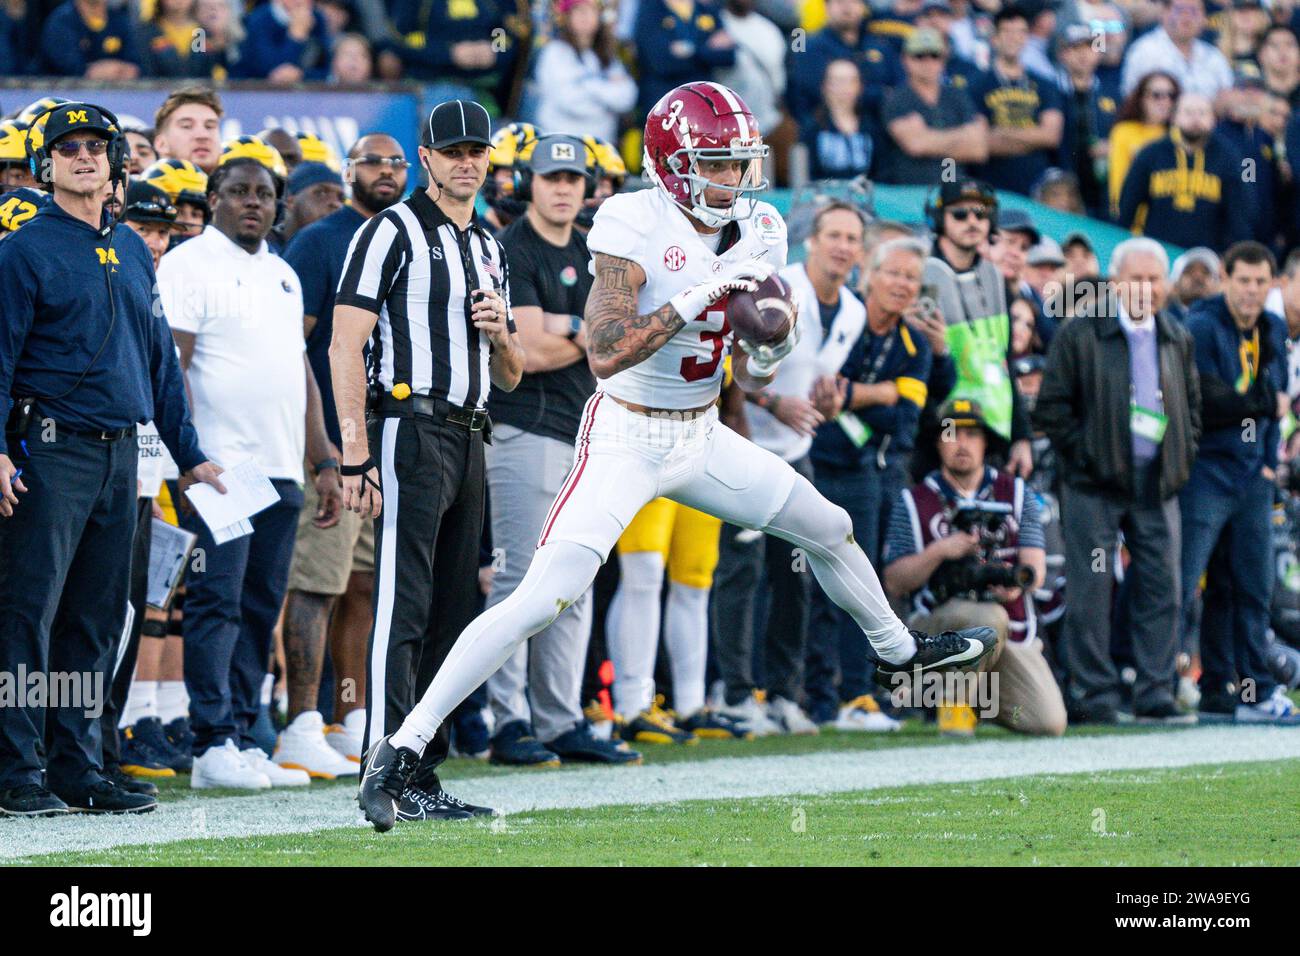 Alabama Crimson Tide wide receiver Jermaine Burton (3) makes a catch during the CFP Semifinal at the Rose Bowl Game against the Michigan Wolverines, M Stock Photo